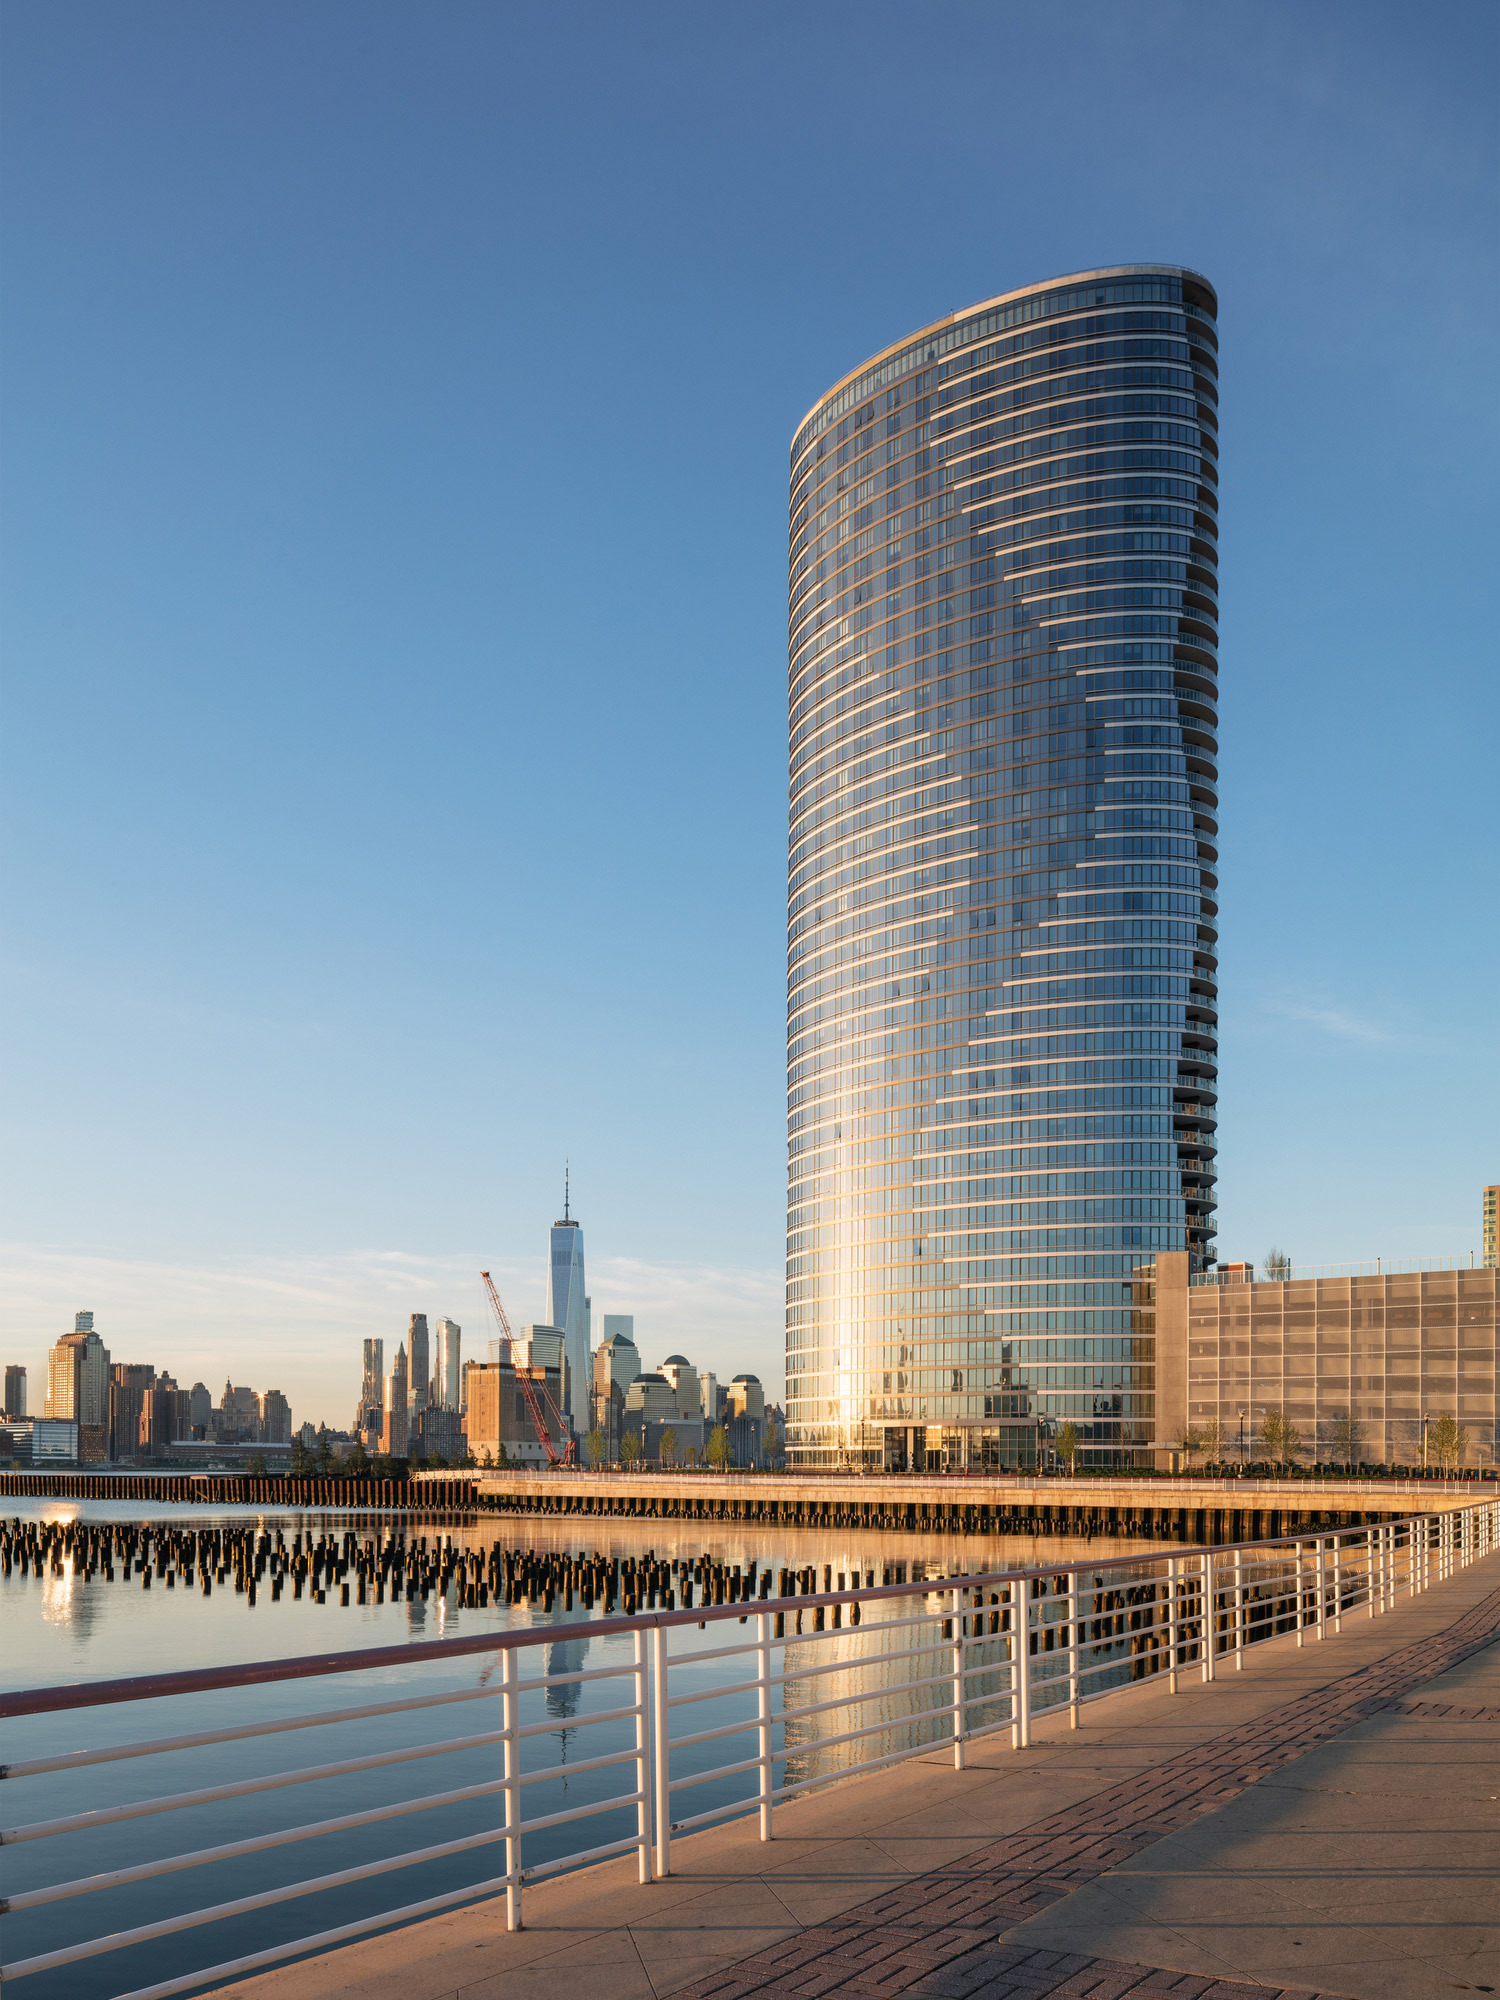 Modern high-rise building with curved glass facade reflecting the sunset's warm hues, featuring a sleek, cylindrical architecture that stands out against a clear blue sky with a city skyline backdrop.